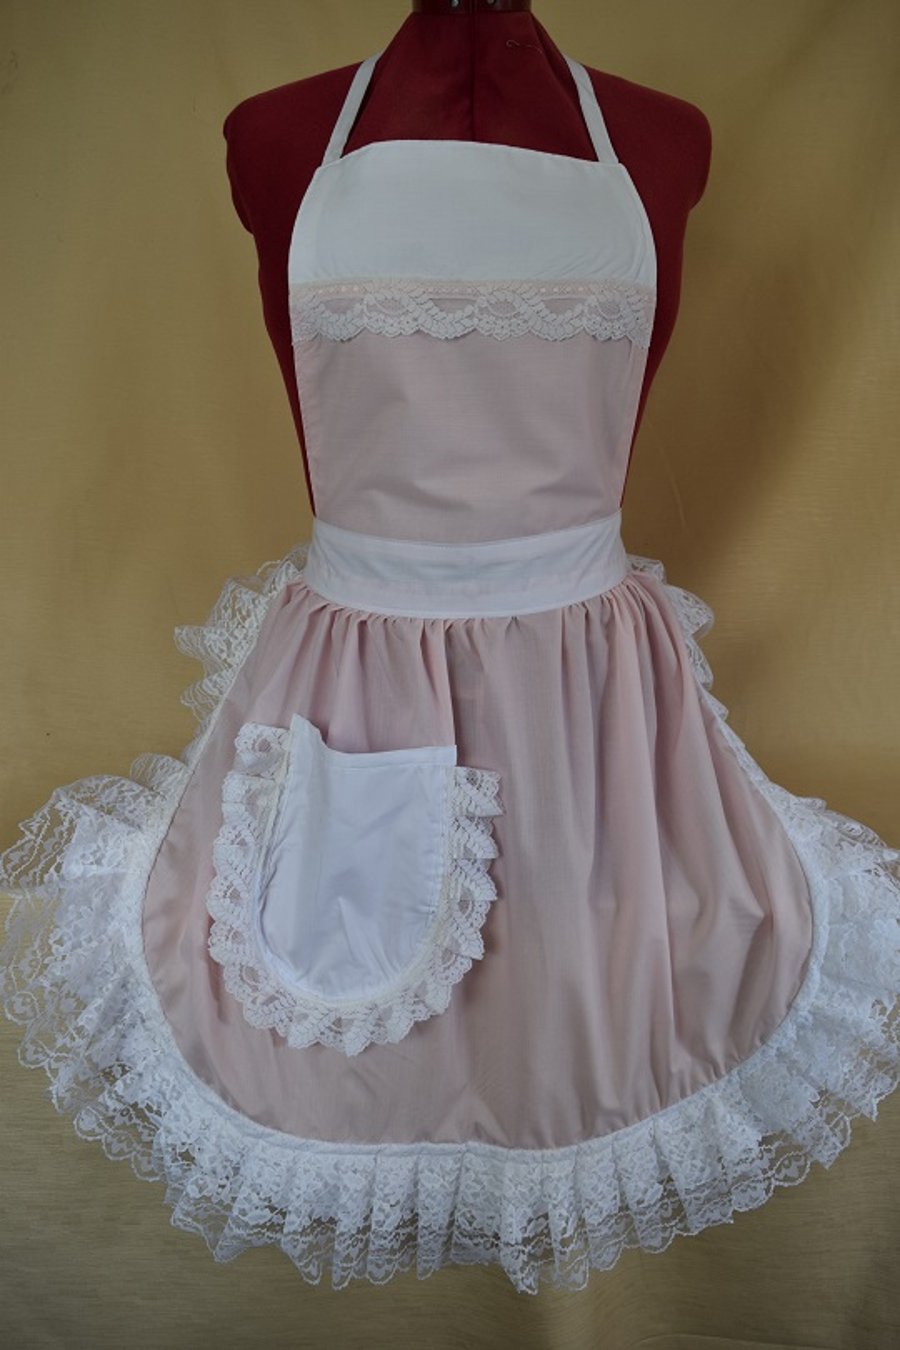 Vintage 50s Style Full Apron Pinny - Baby Pink & White with Lace Trim